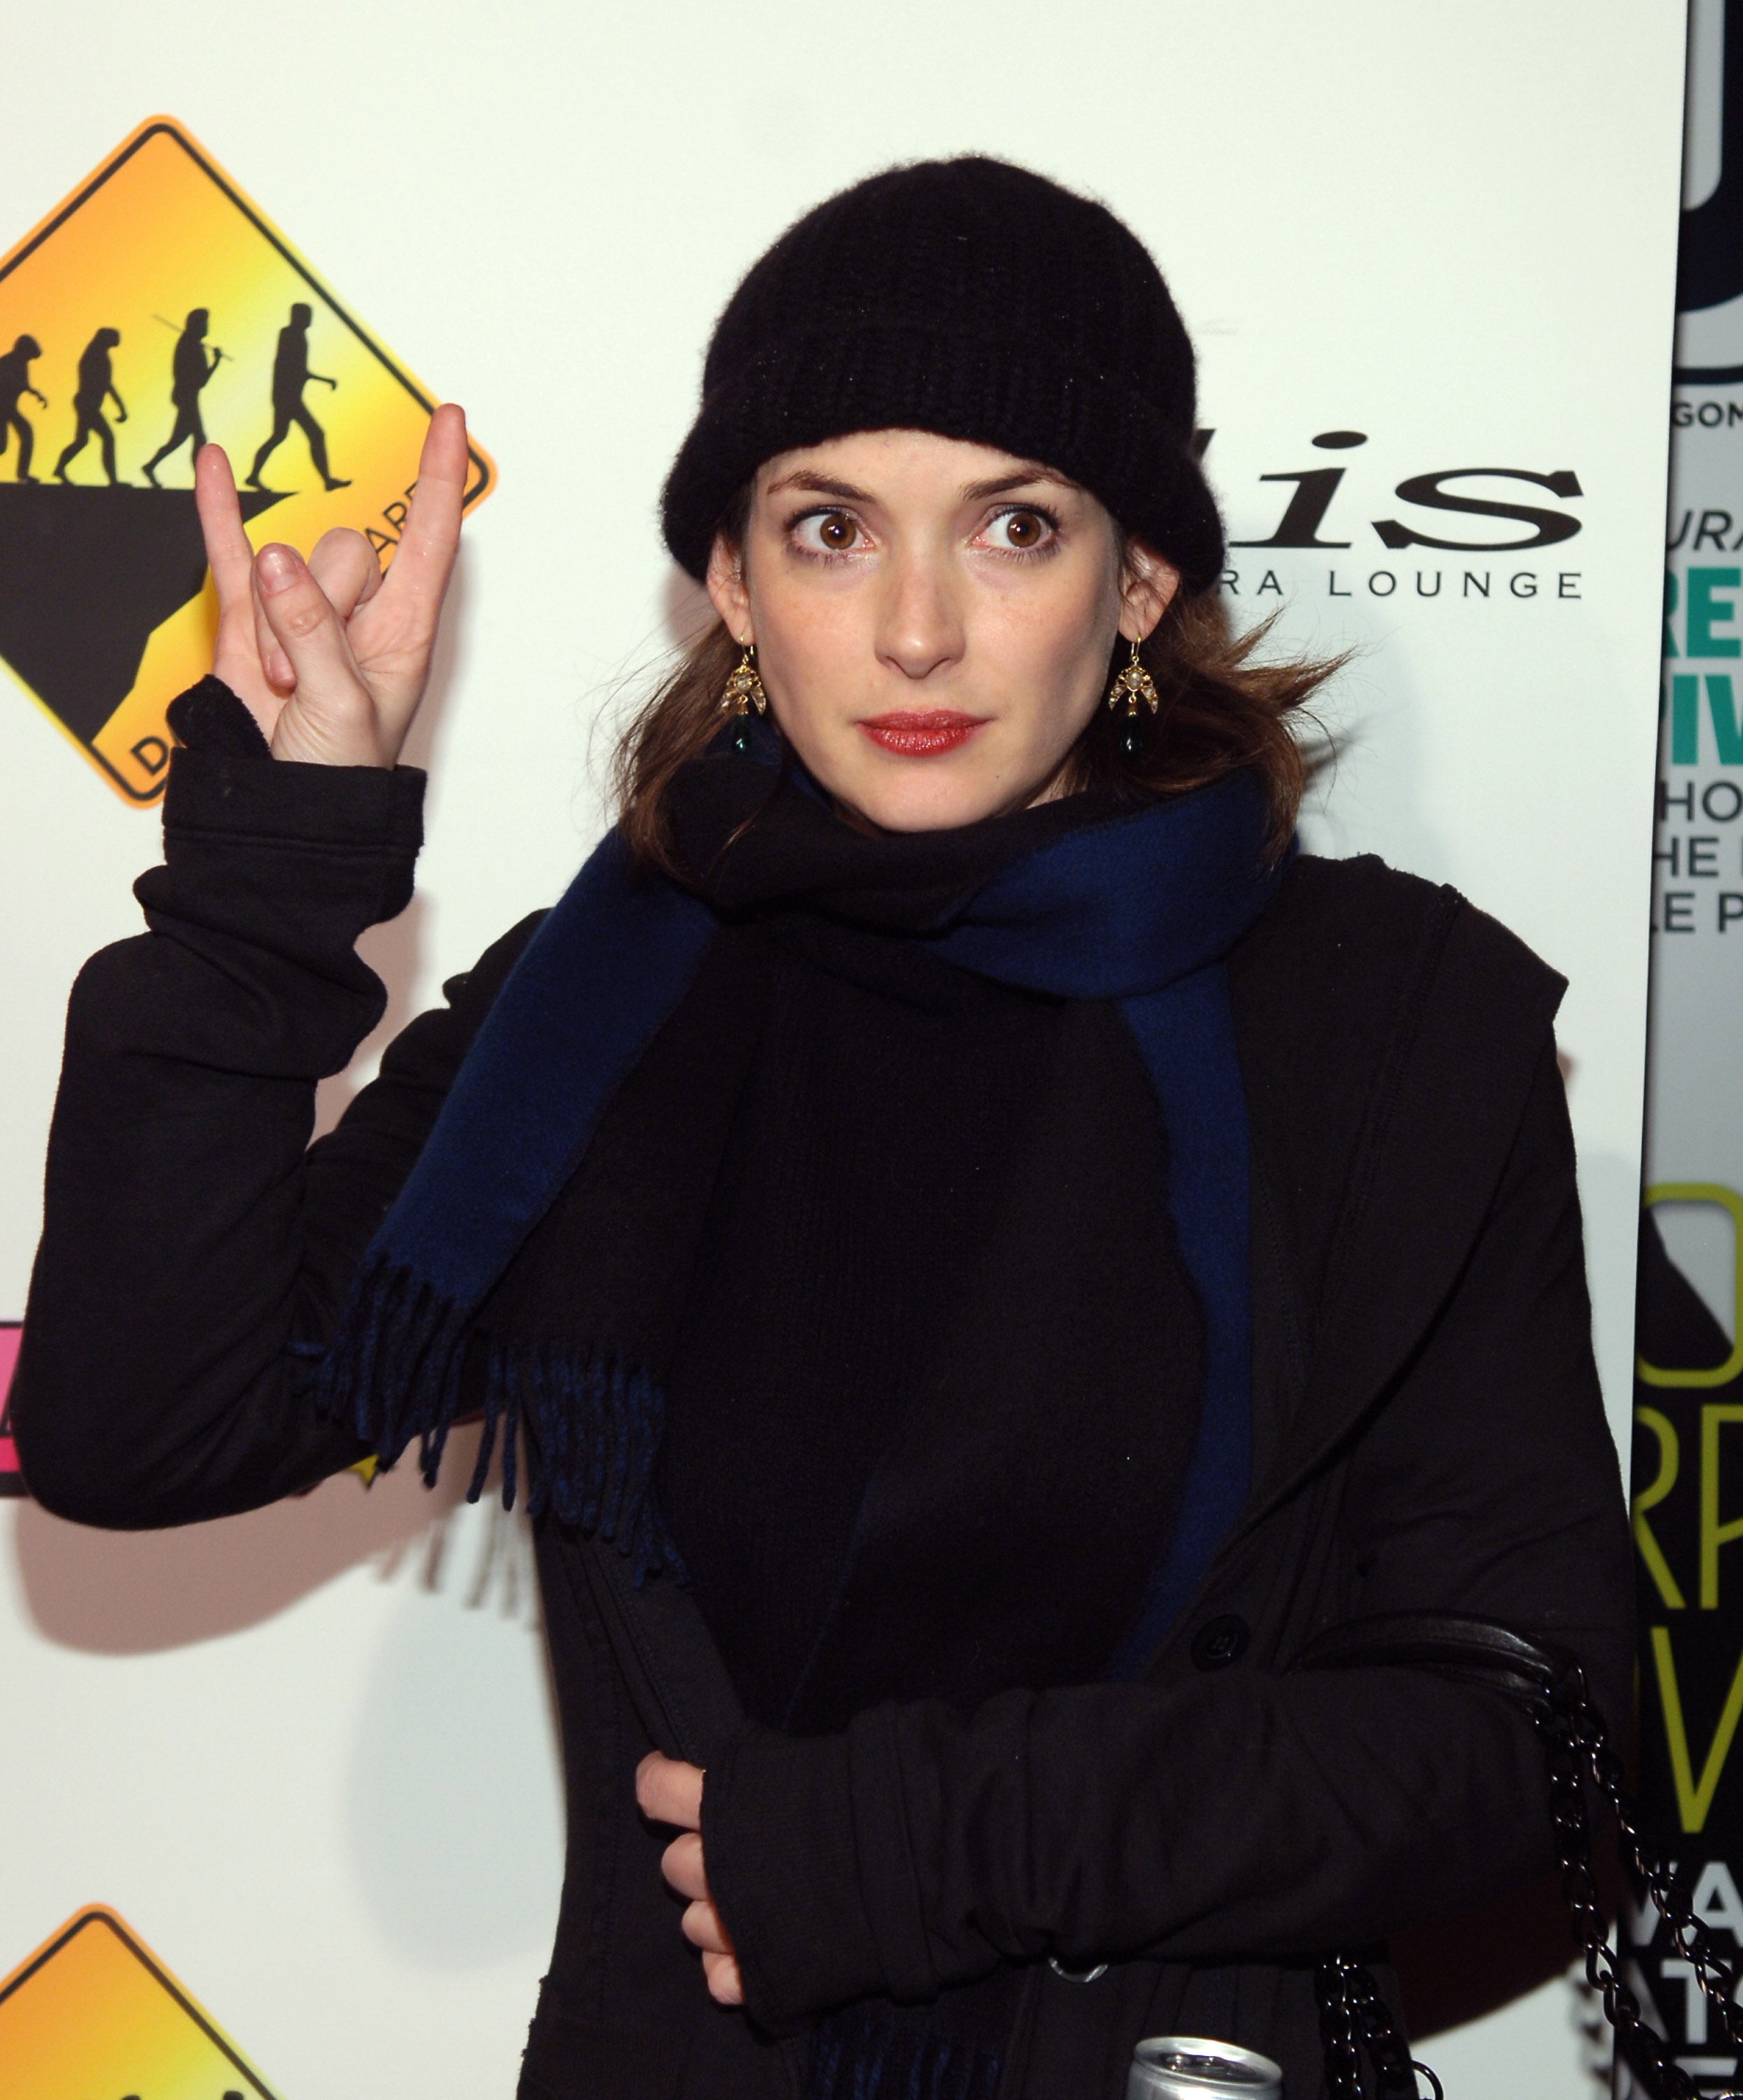 Winona Ryder Park City - Cargo Concert Series on January 27, 2006 in Park City, Utah. | Source: Getty Images